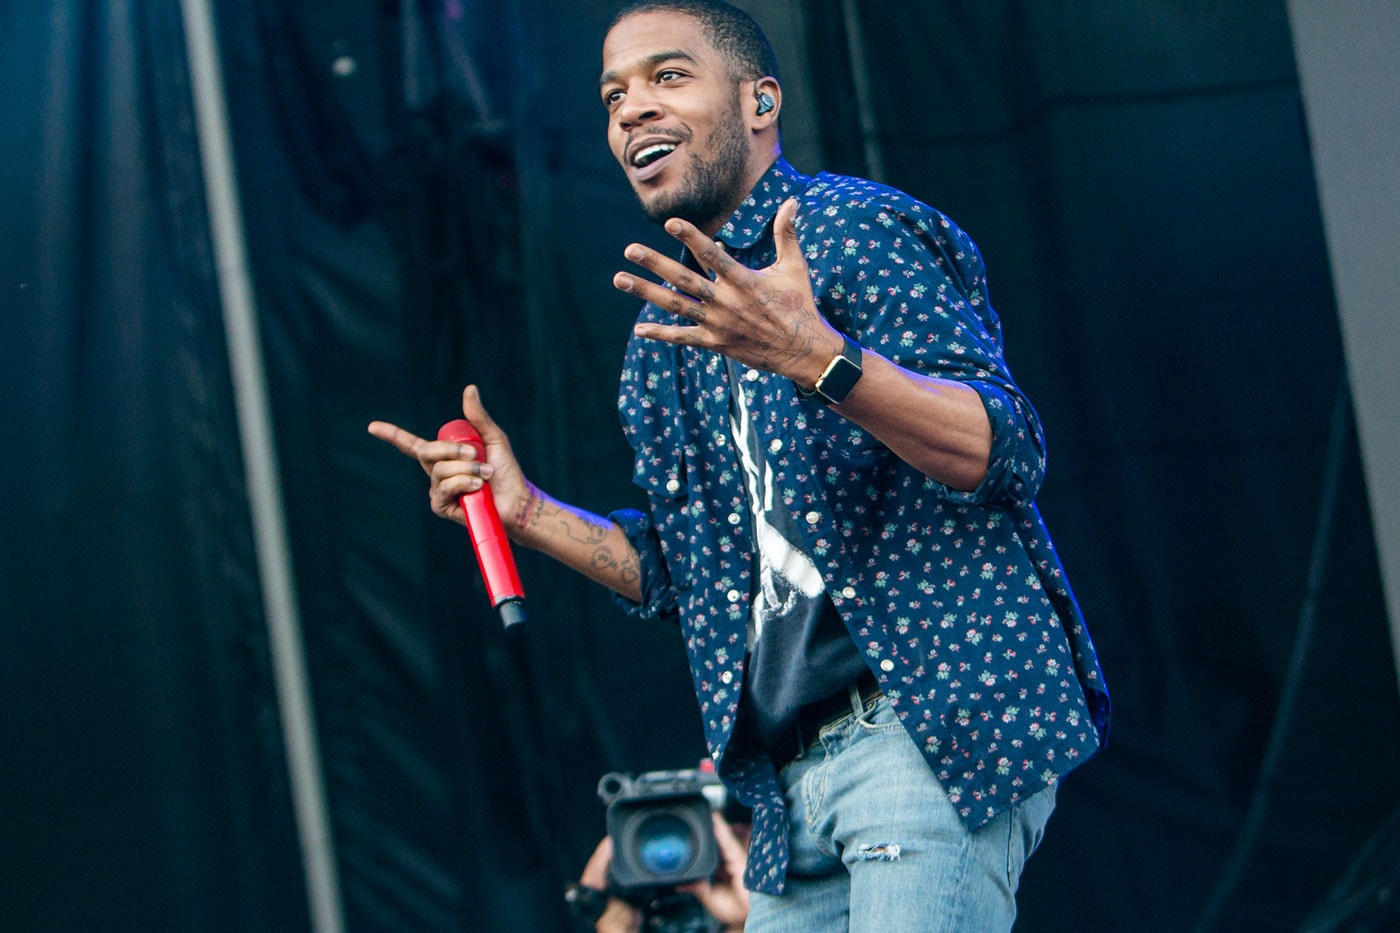 Kid Cudi Gives Travi$ Scott Major Support Ahead of 'Rodeo' Release